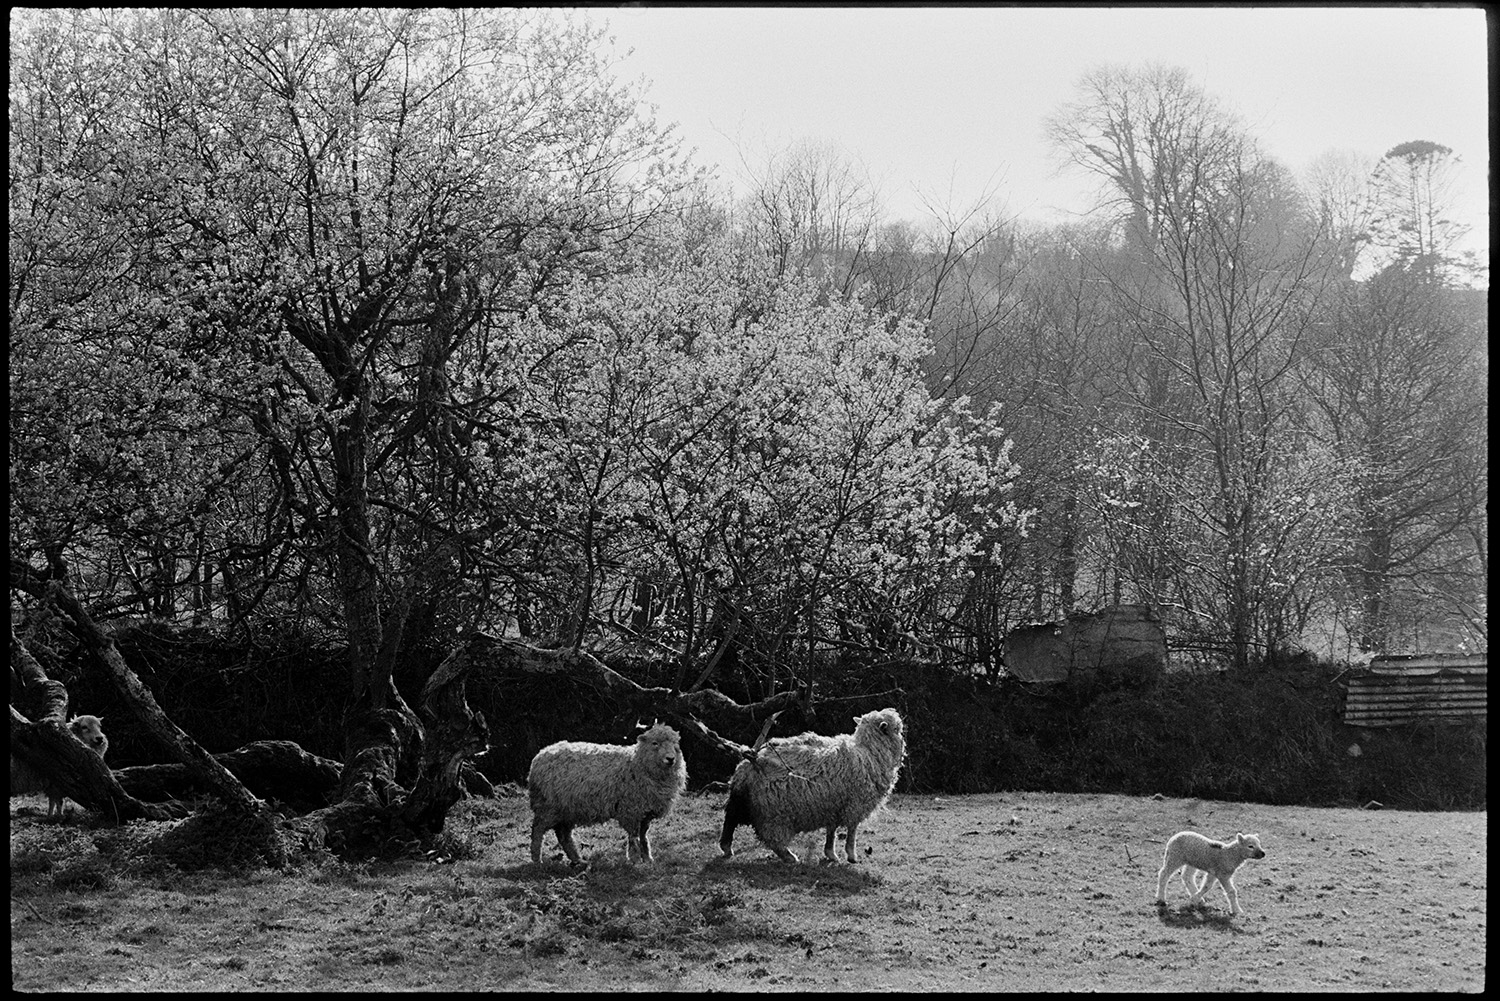 Shepherd farmer with dog leading sheep in wooded track. 
[Two sheep and a lamb in a field with trees at Millhams, Dolton. Sheds can be seen in the background, behind a hedge.]